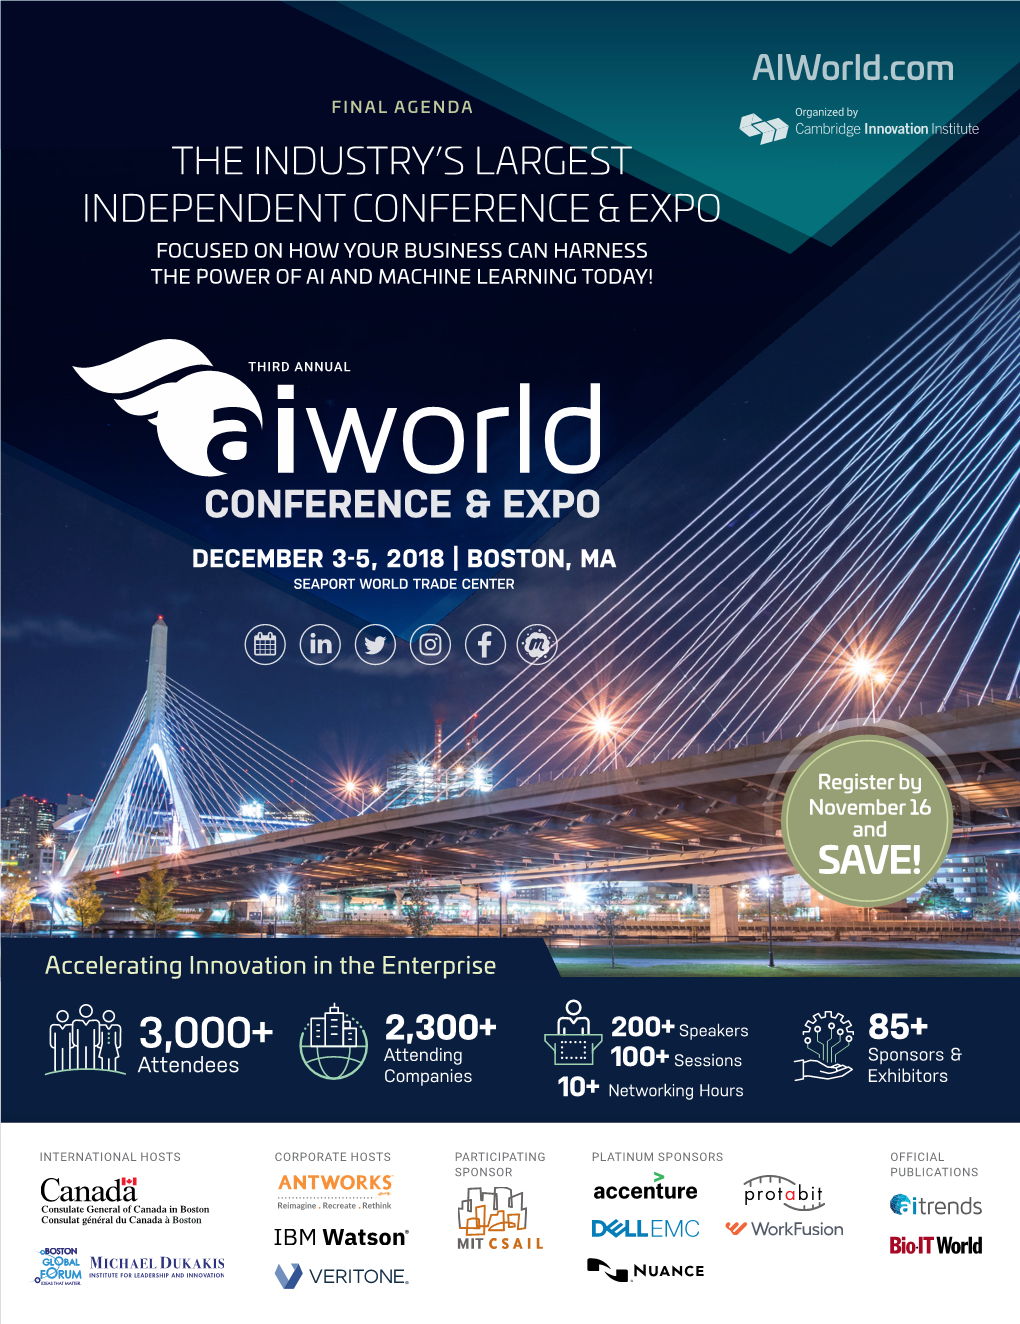 Conference & Expo